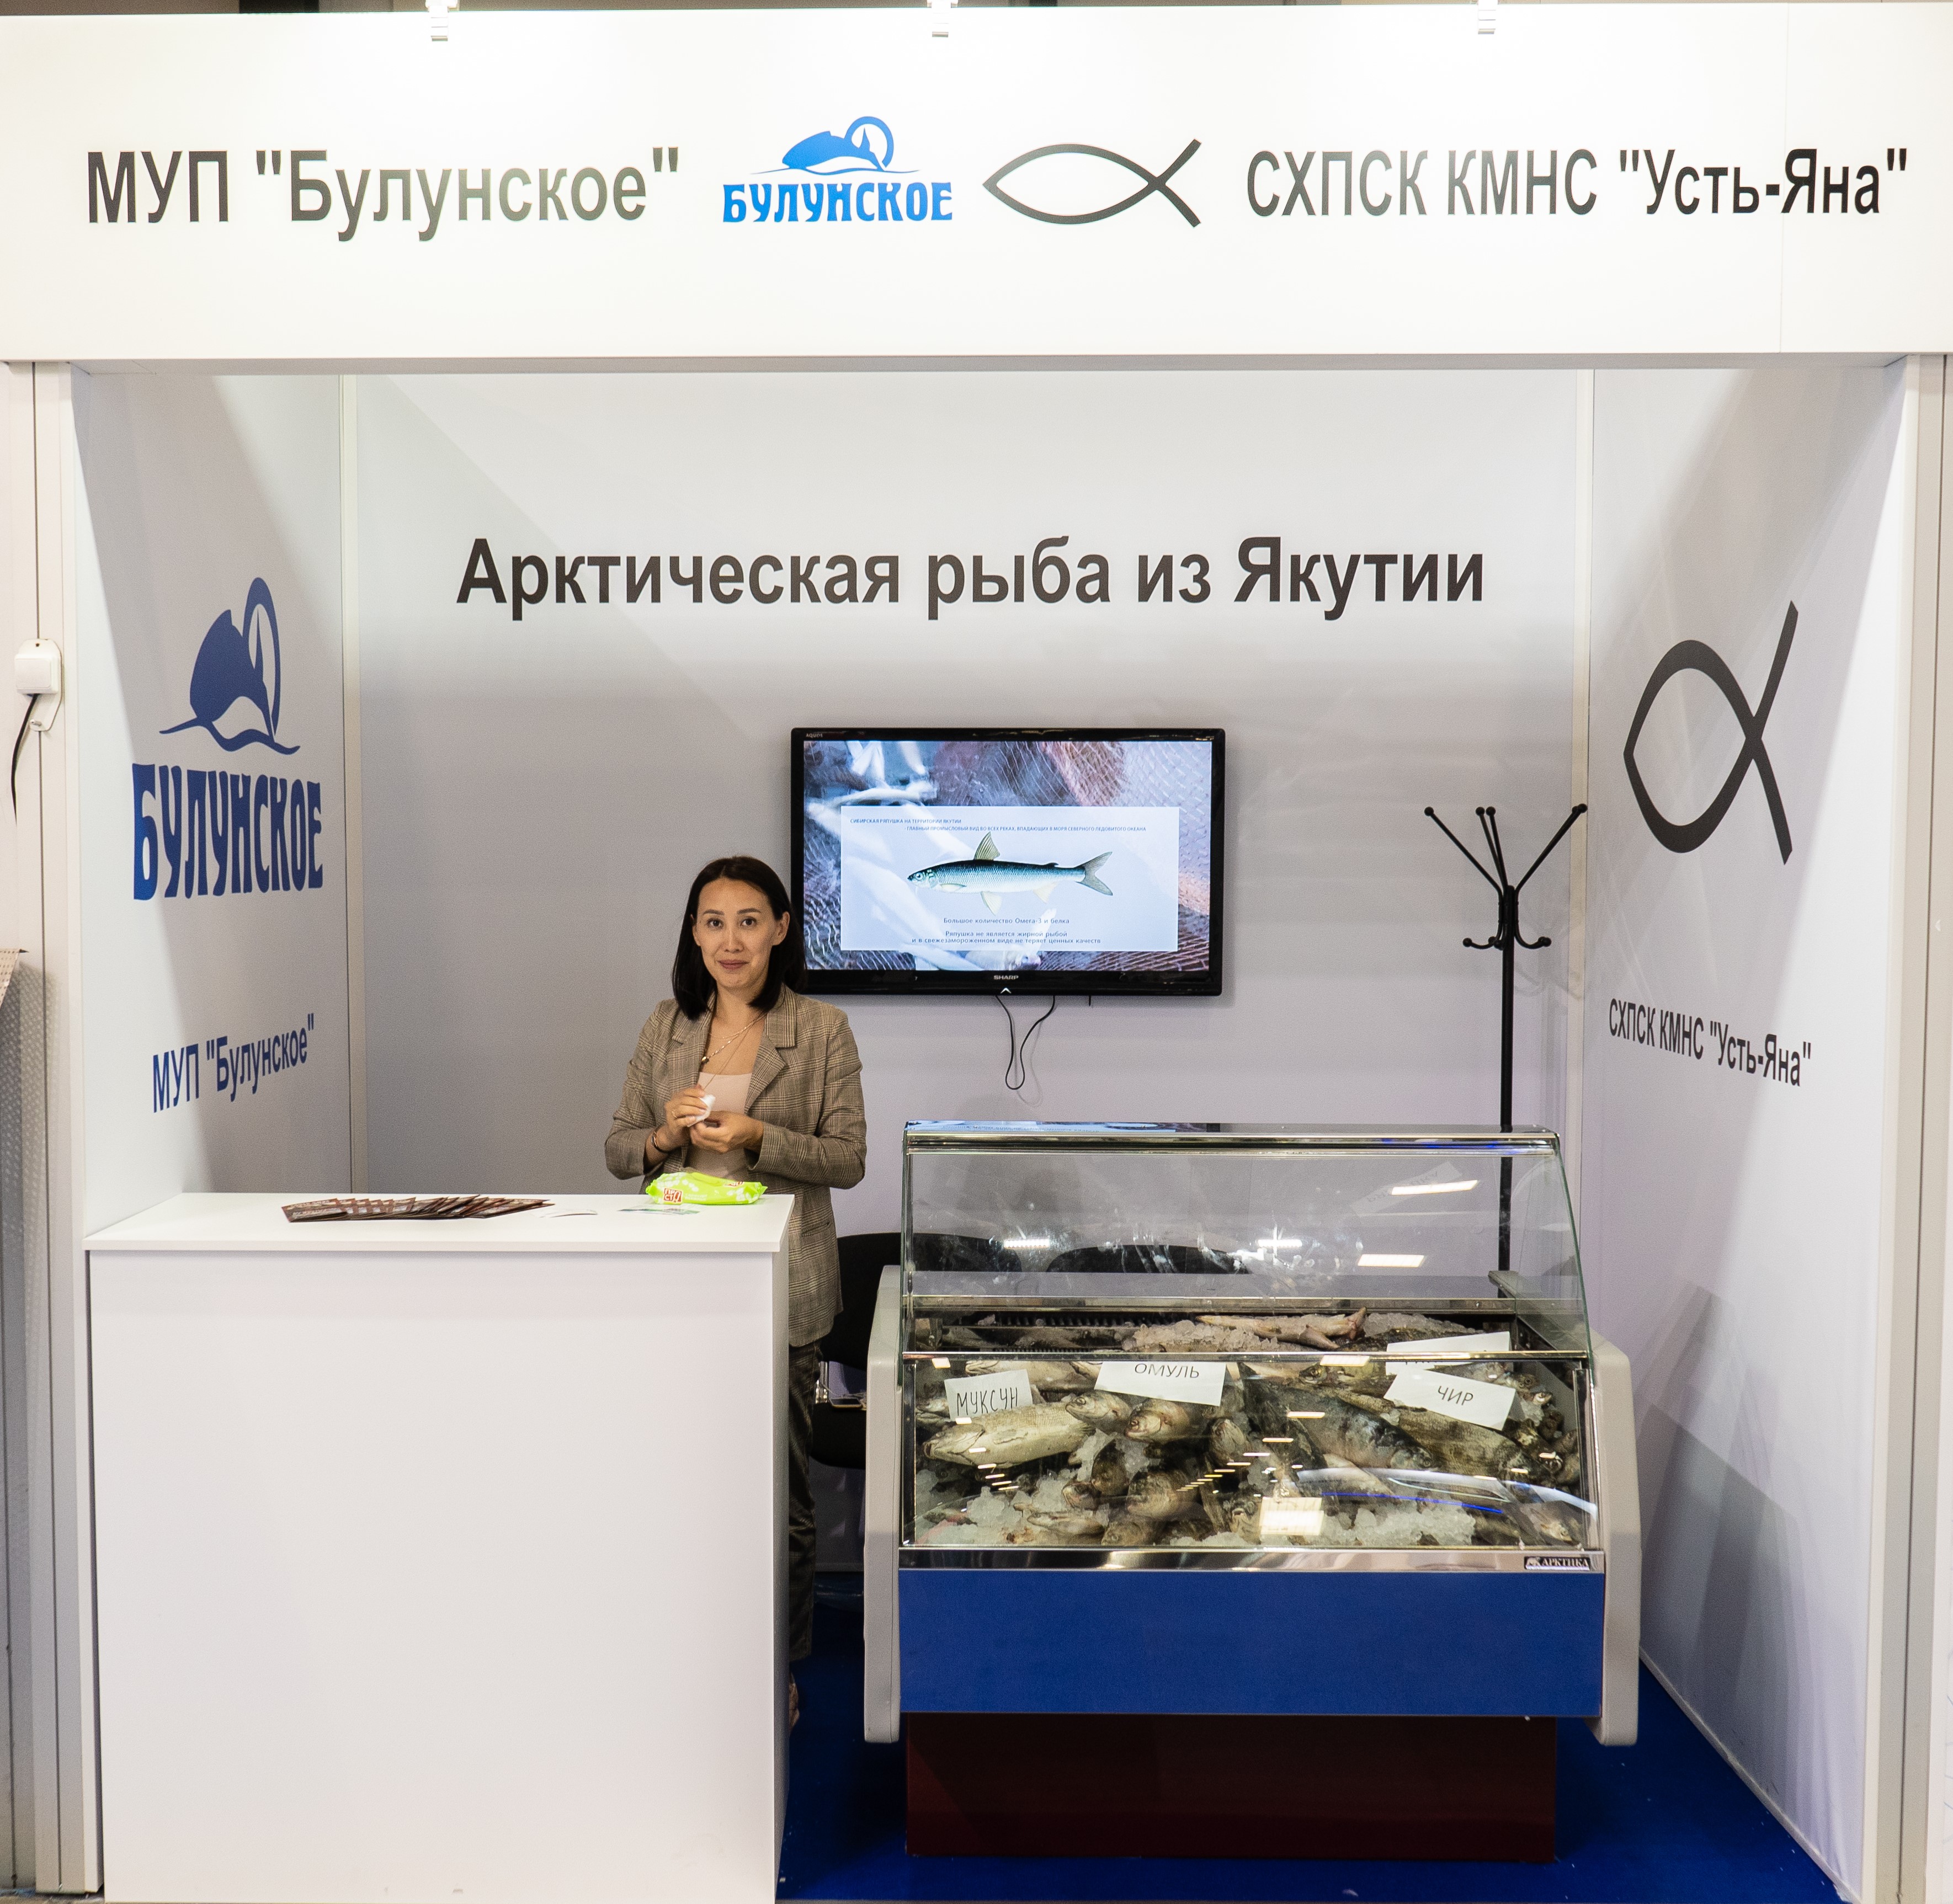 MUN Bulunskoe to participate at SEAFOOD EXPO RUSSIA 